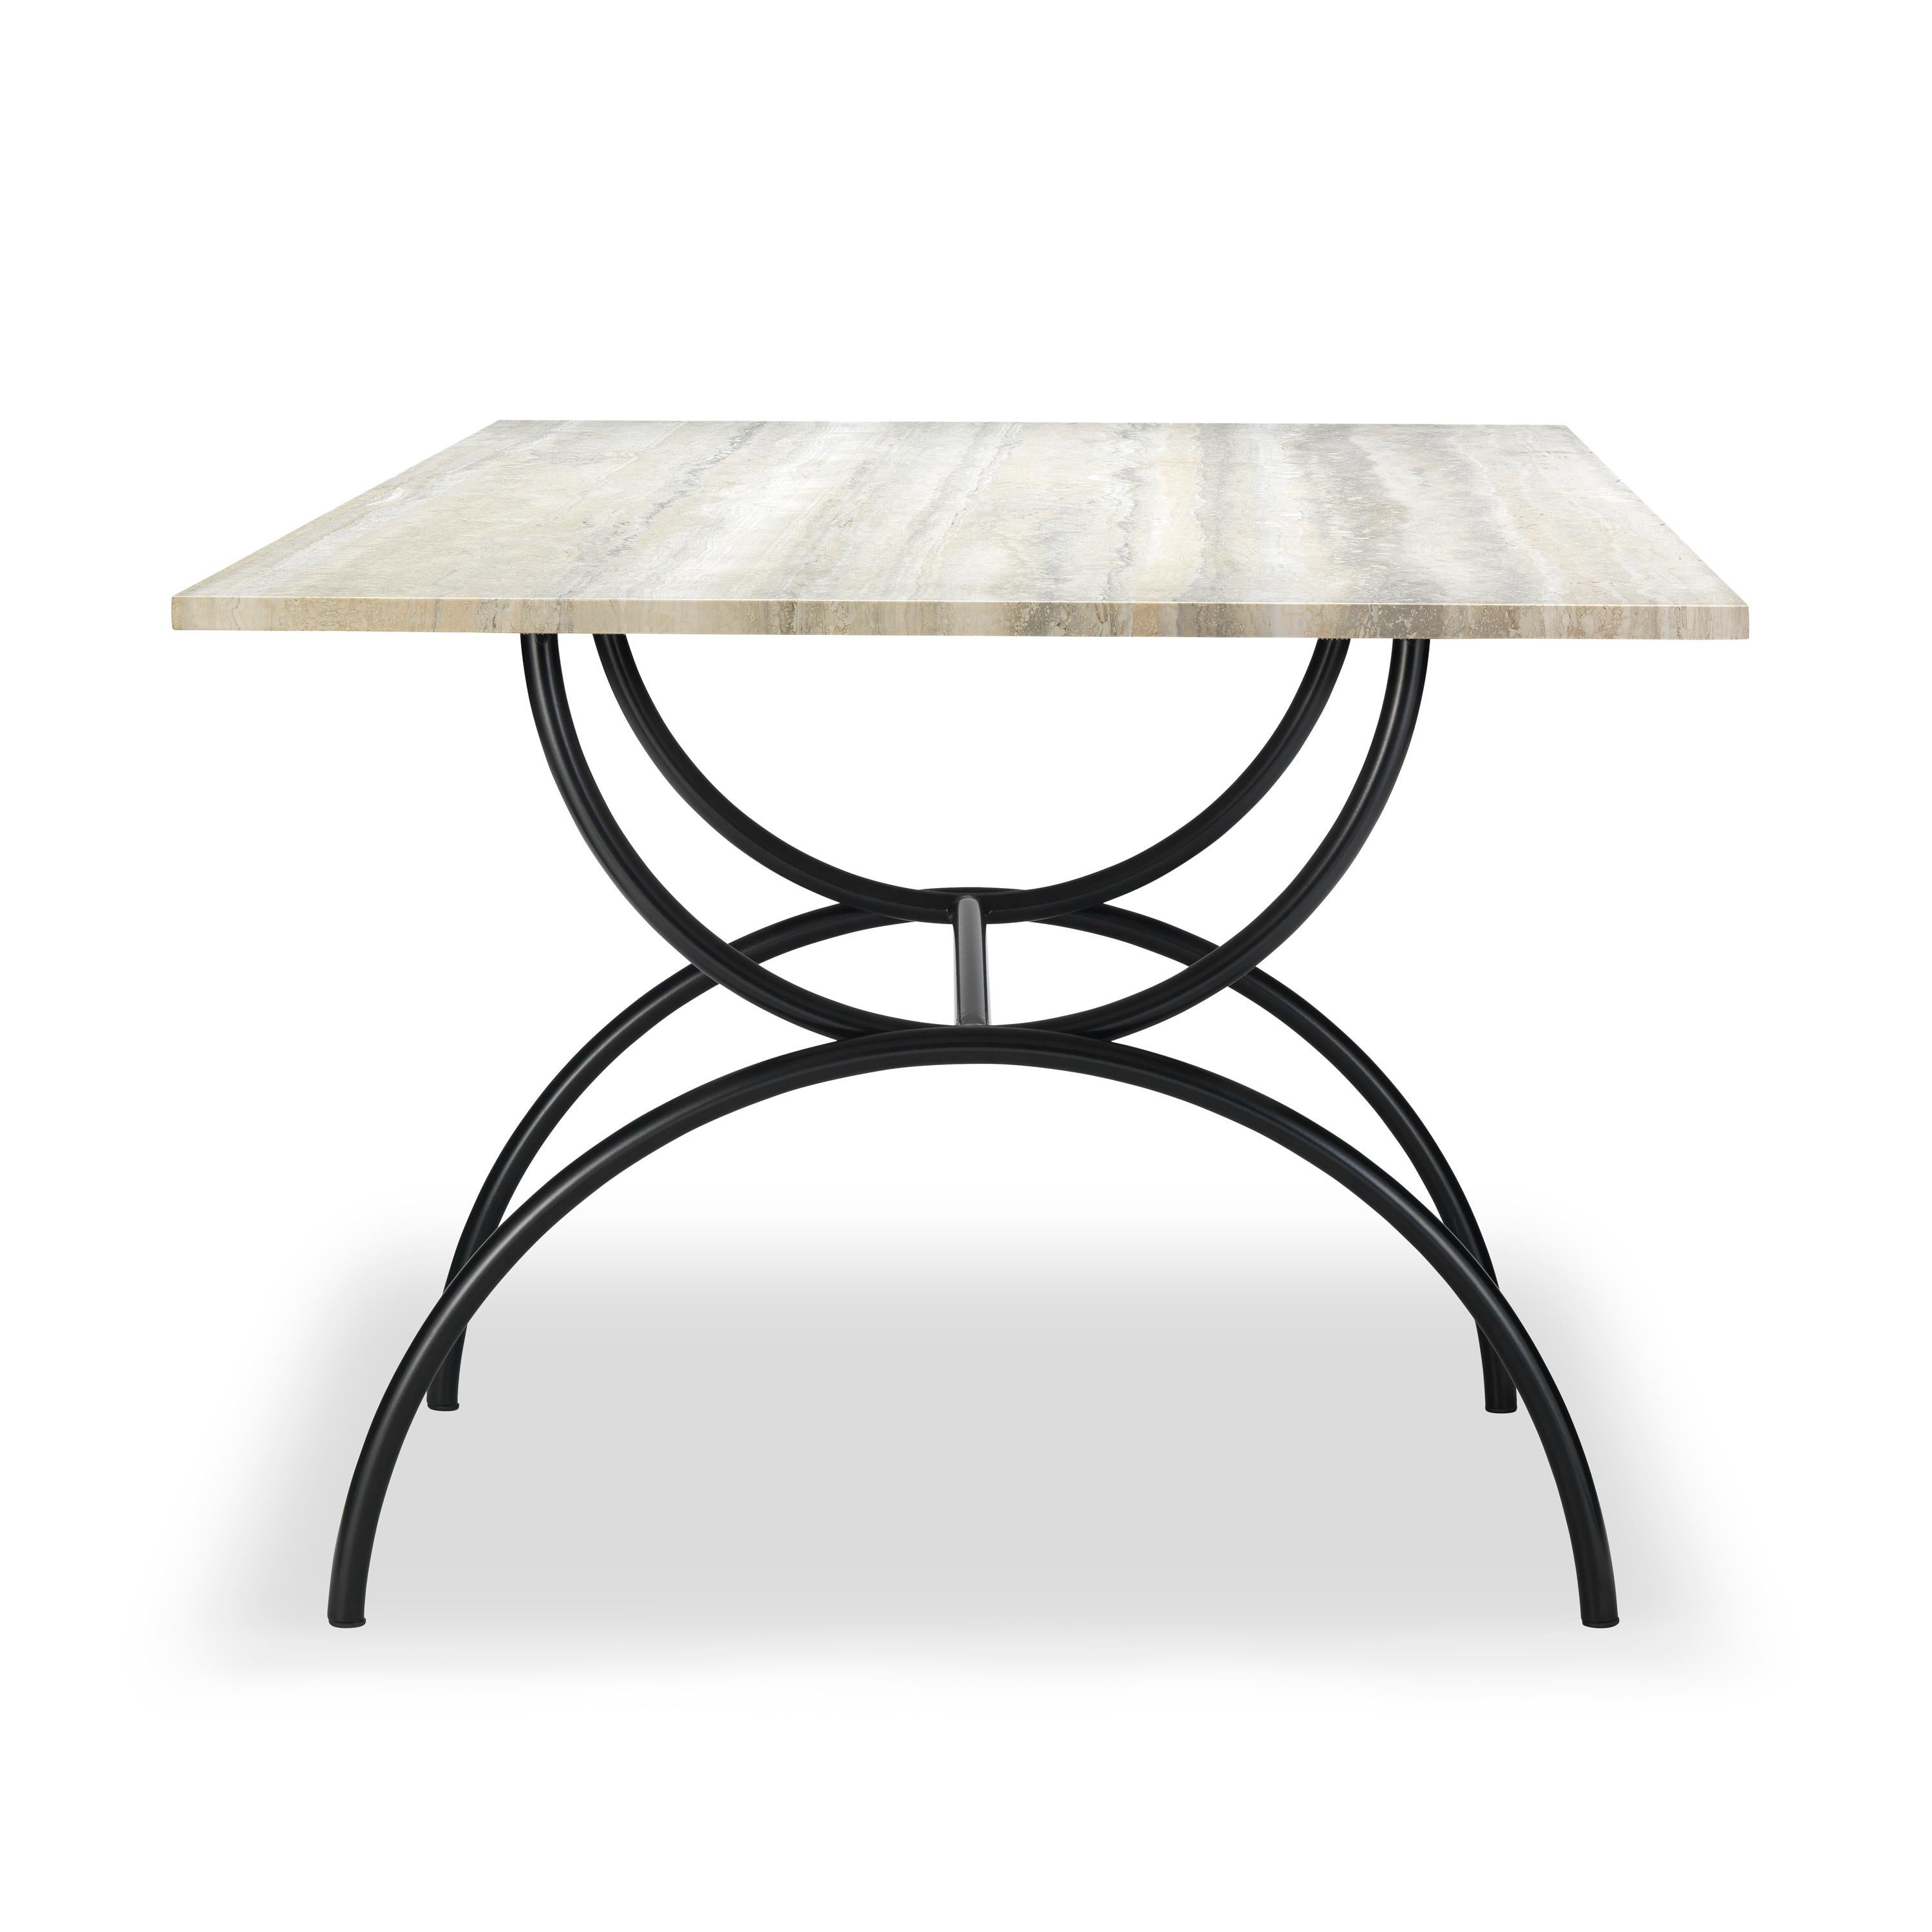 Ten10 Pompeii dining table with a stainless steel base powder coated semi-gloss black and a vein cut filled honed silver travertine 3/4